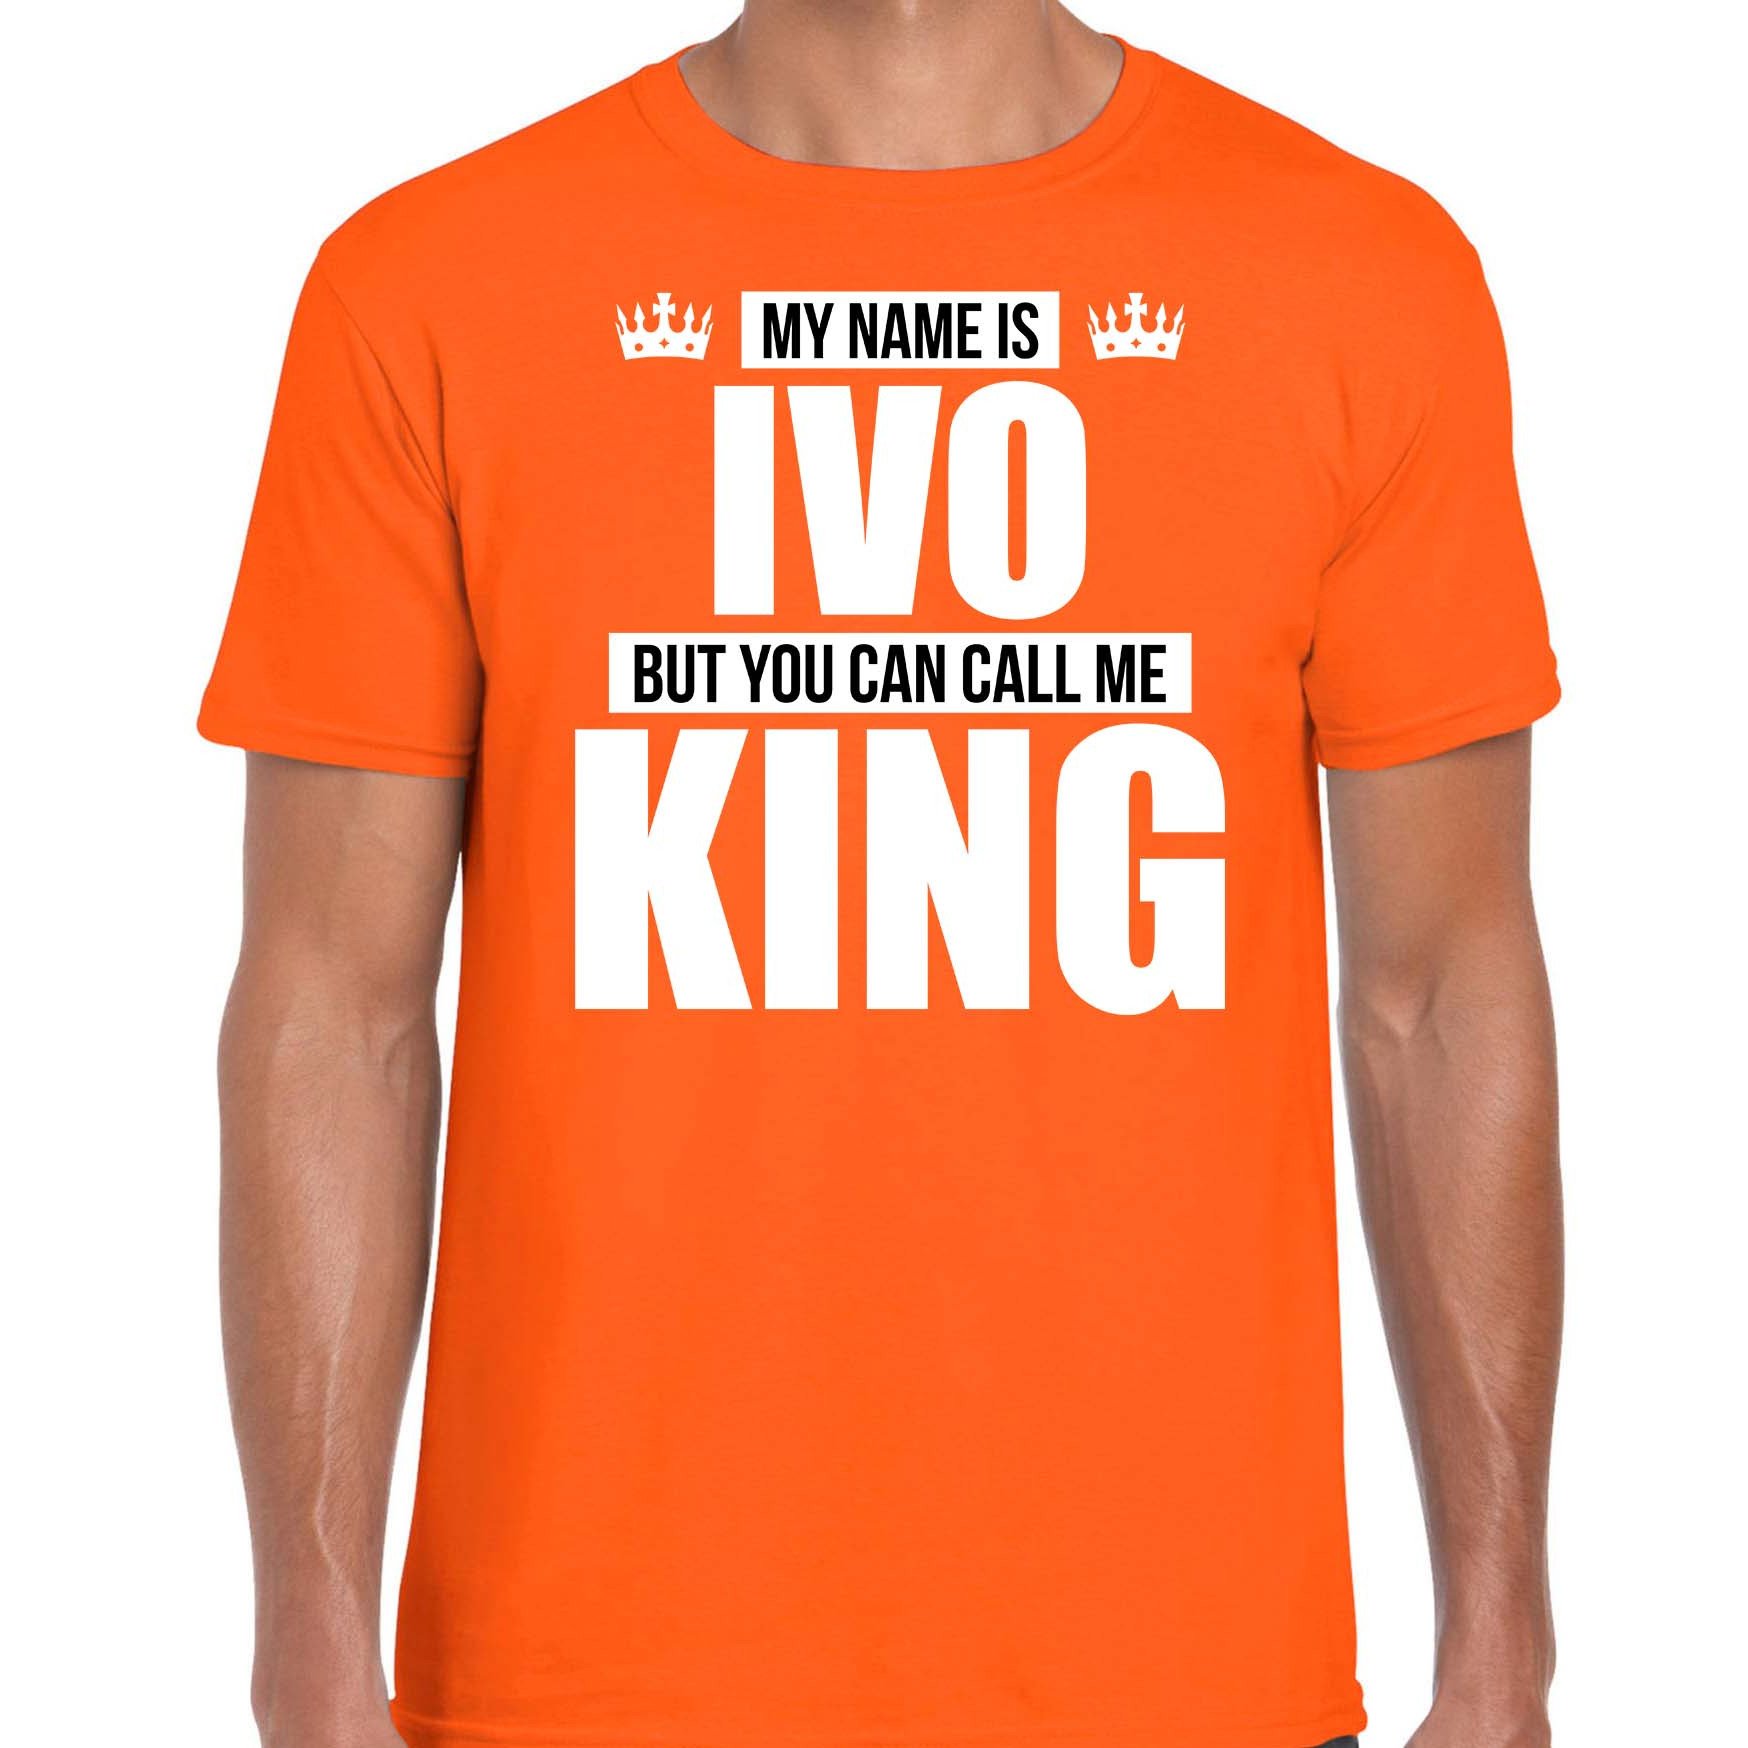 Naam cadeau t-shirt my name is Ivo but you can call me King oranje voor heren